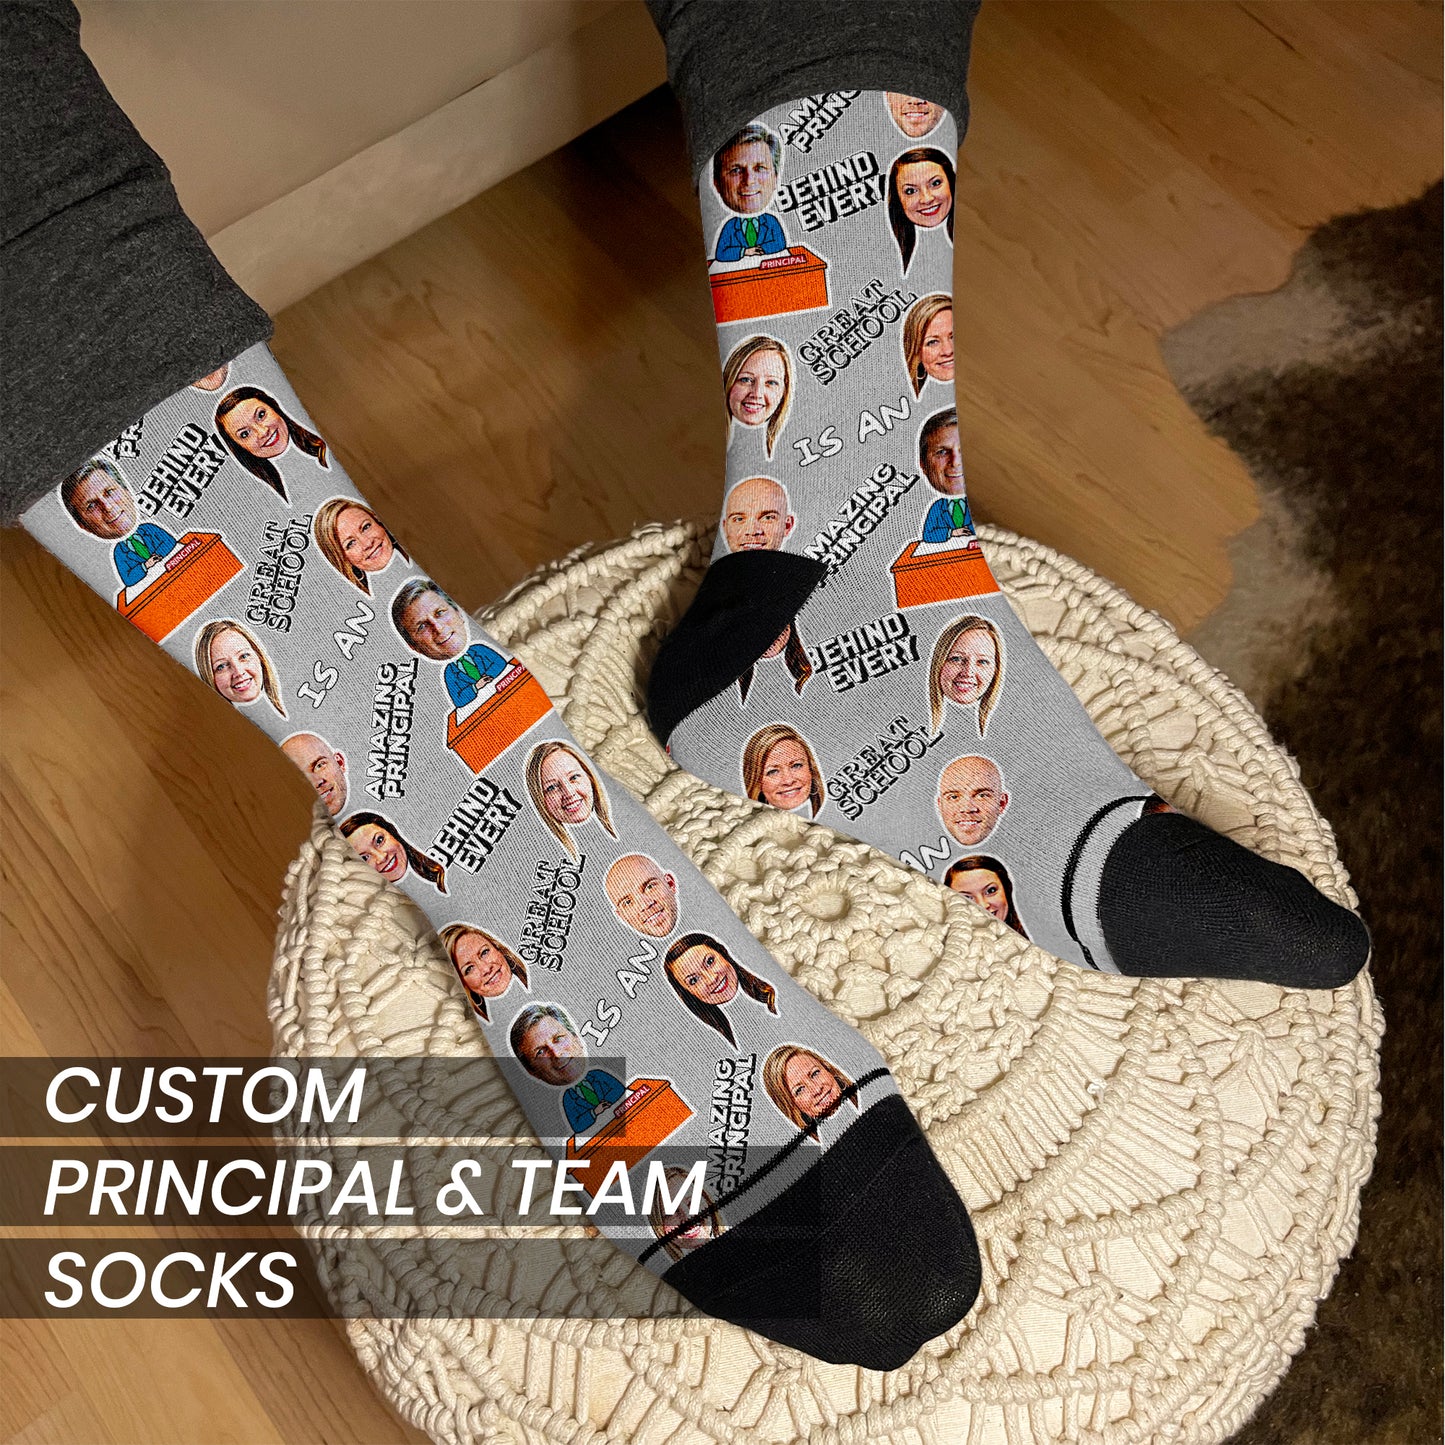 personalized school principal socks with faces of the staff on man's feet